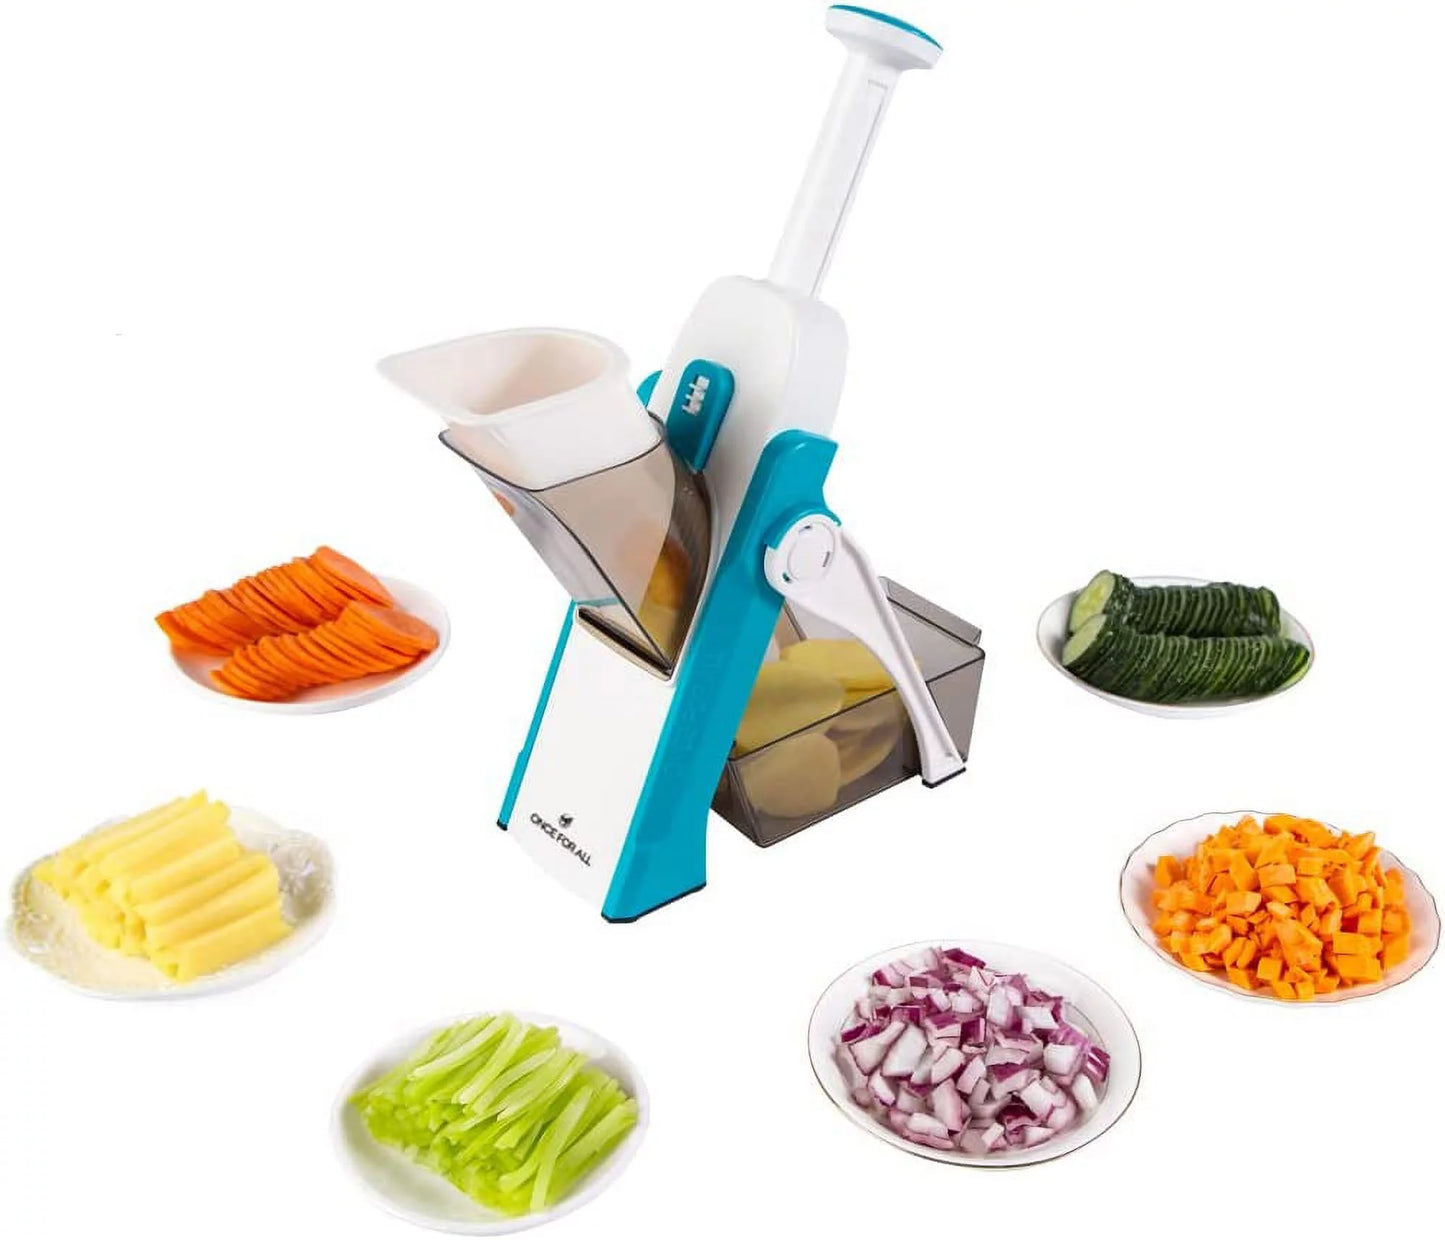 5 in 1 Vegetable Slicer This Mandolin Cuts Your Fruits and Vegetables, Shredded Potato Chopper Lemon Slicer Onion Grater This slicer will do it all for you